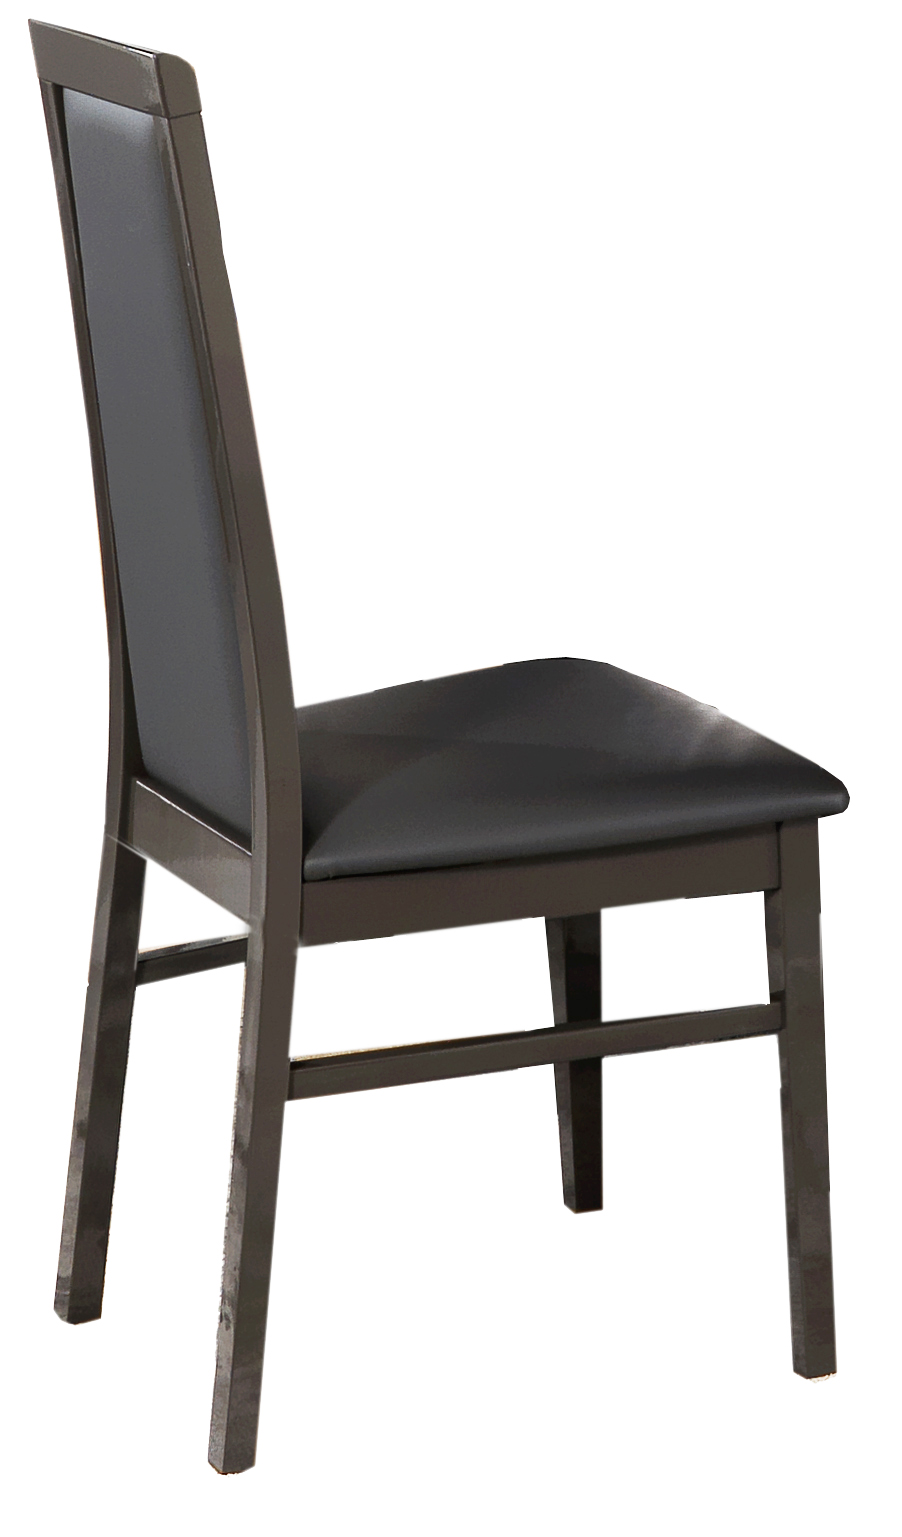 Clearance Bedroom Oxford Dining Chair